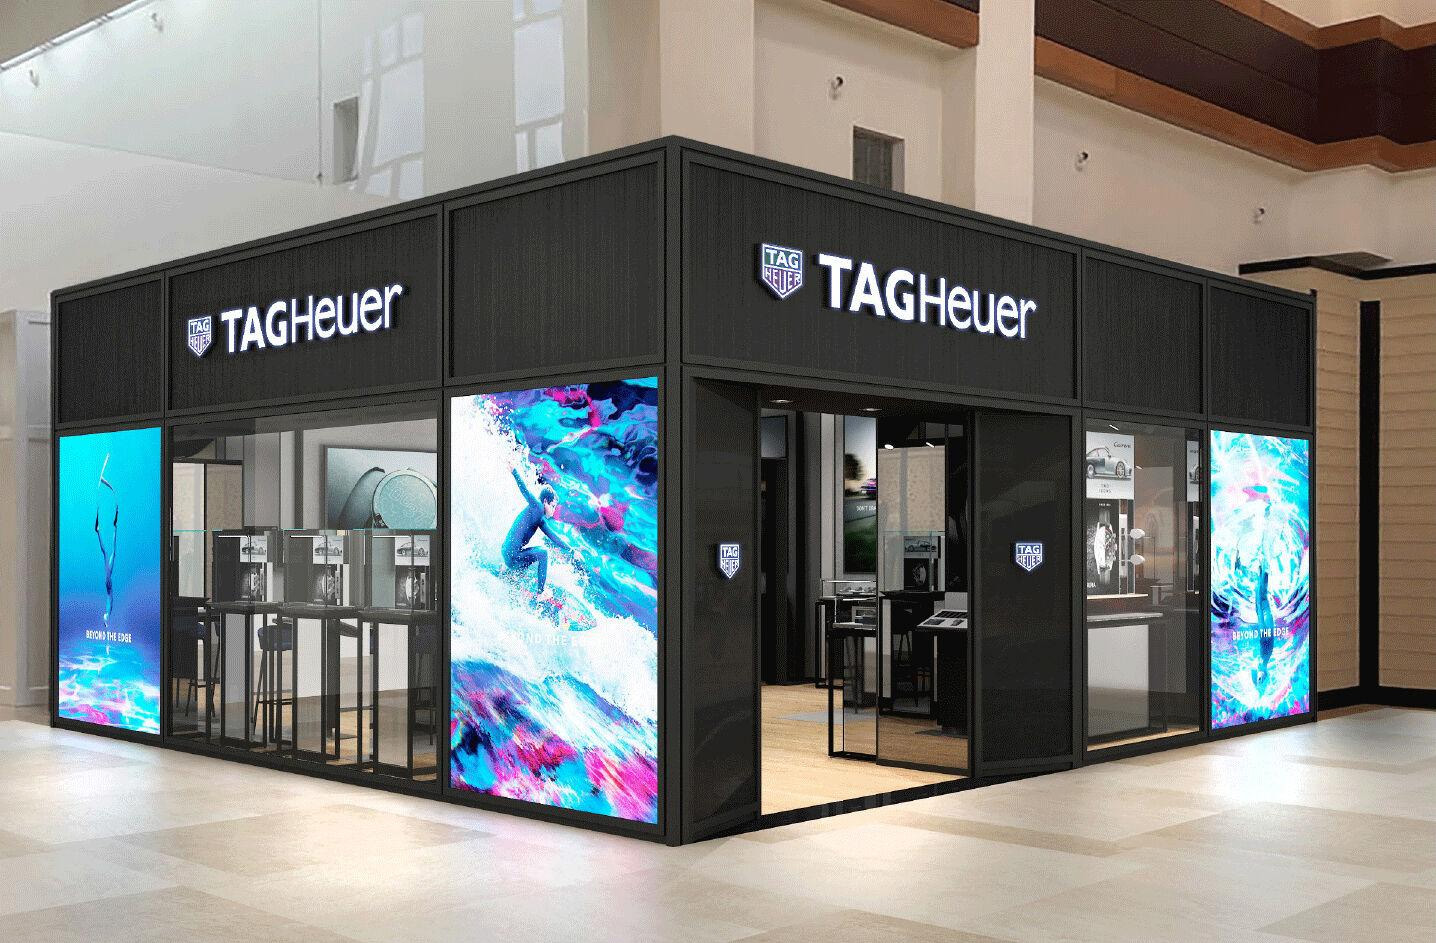 REEDS opens TAG Heuer boutique in Charlotte's SouthPark Mall